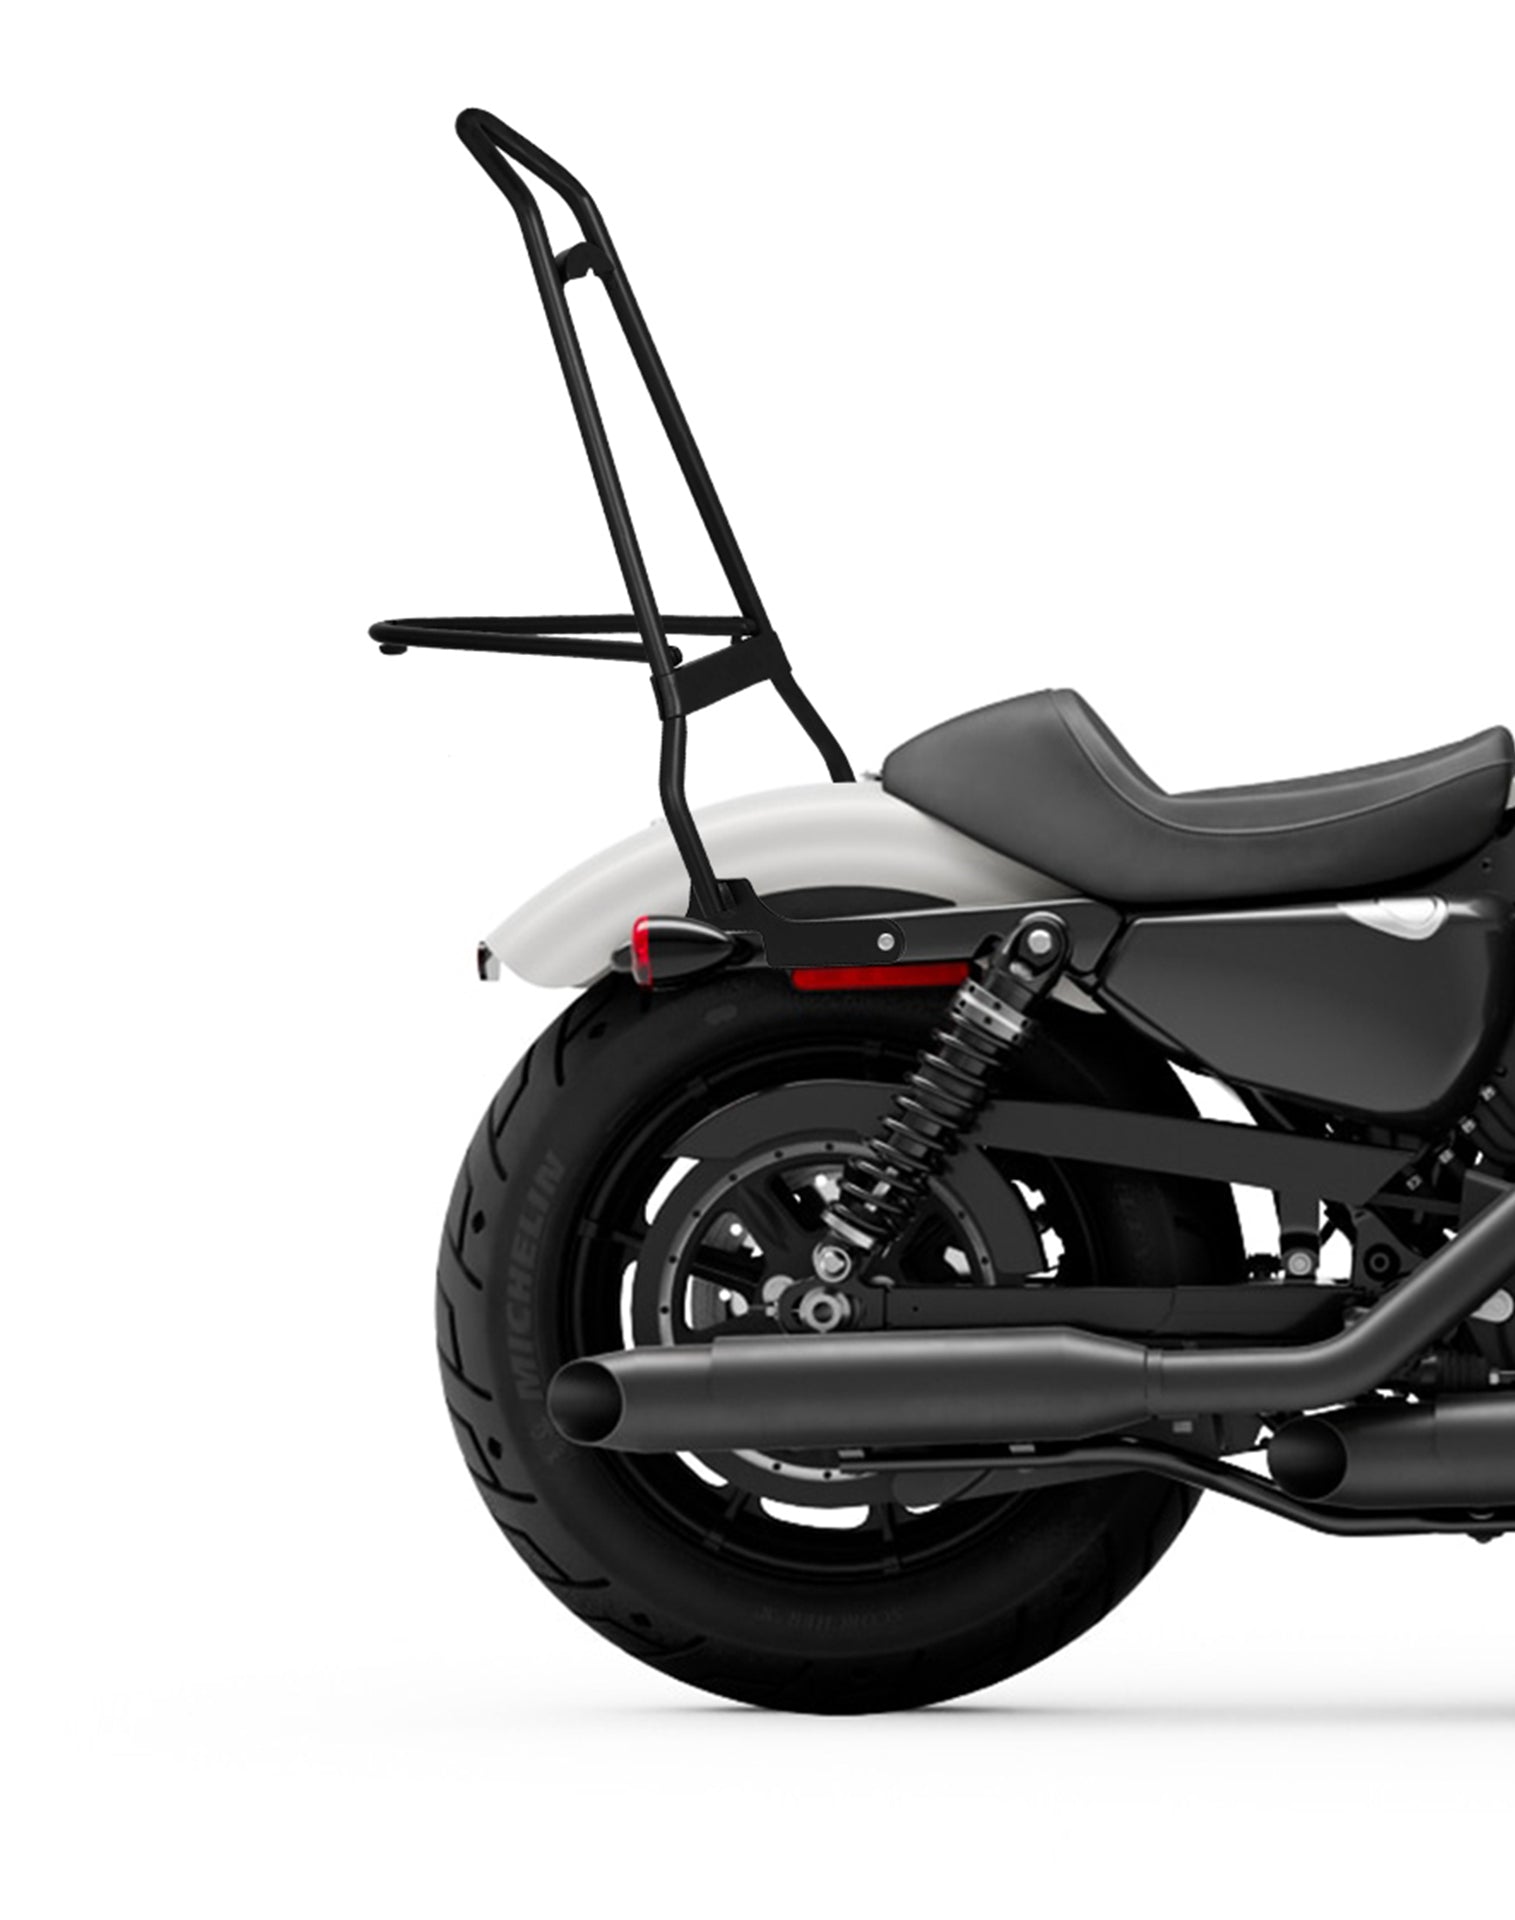 Iron Born Sissy Bar with Foldable Luggage Rack for Harley Sportster Iron 1200 Matte Black Close Up View